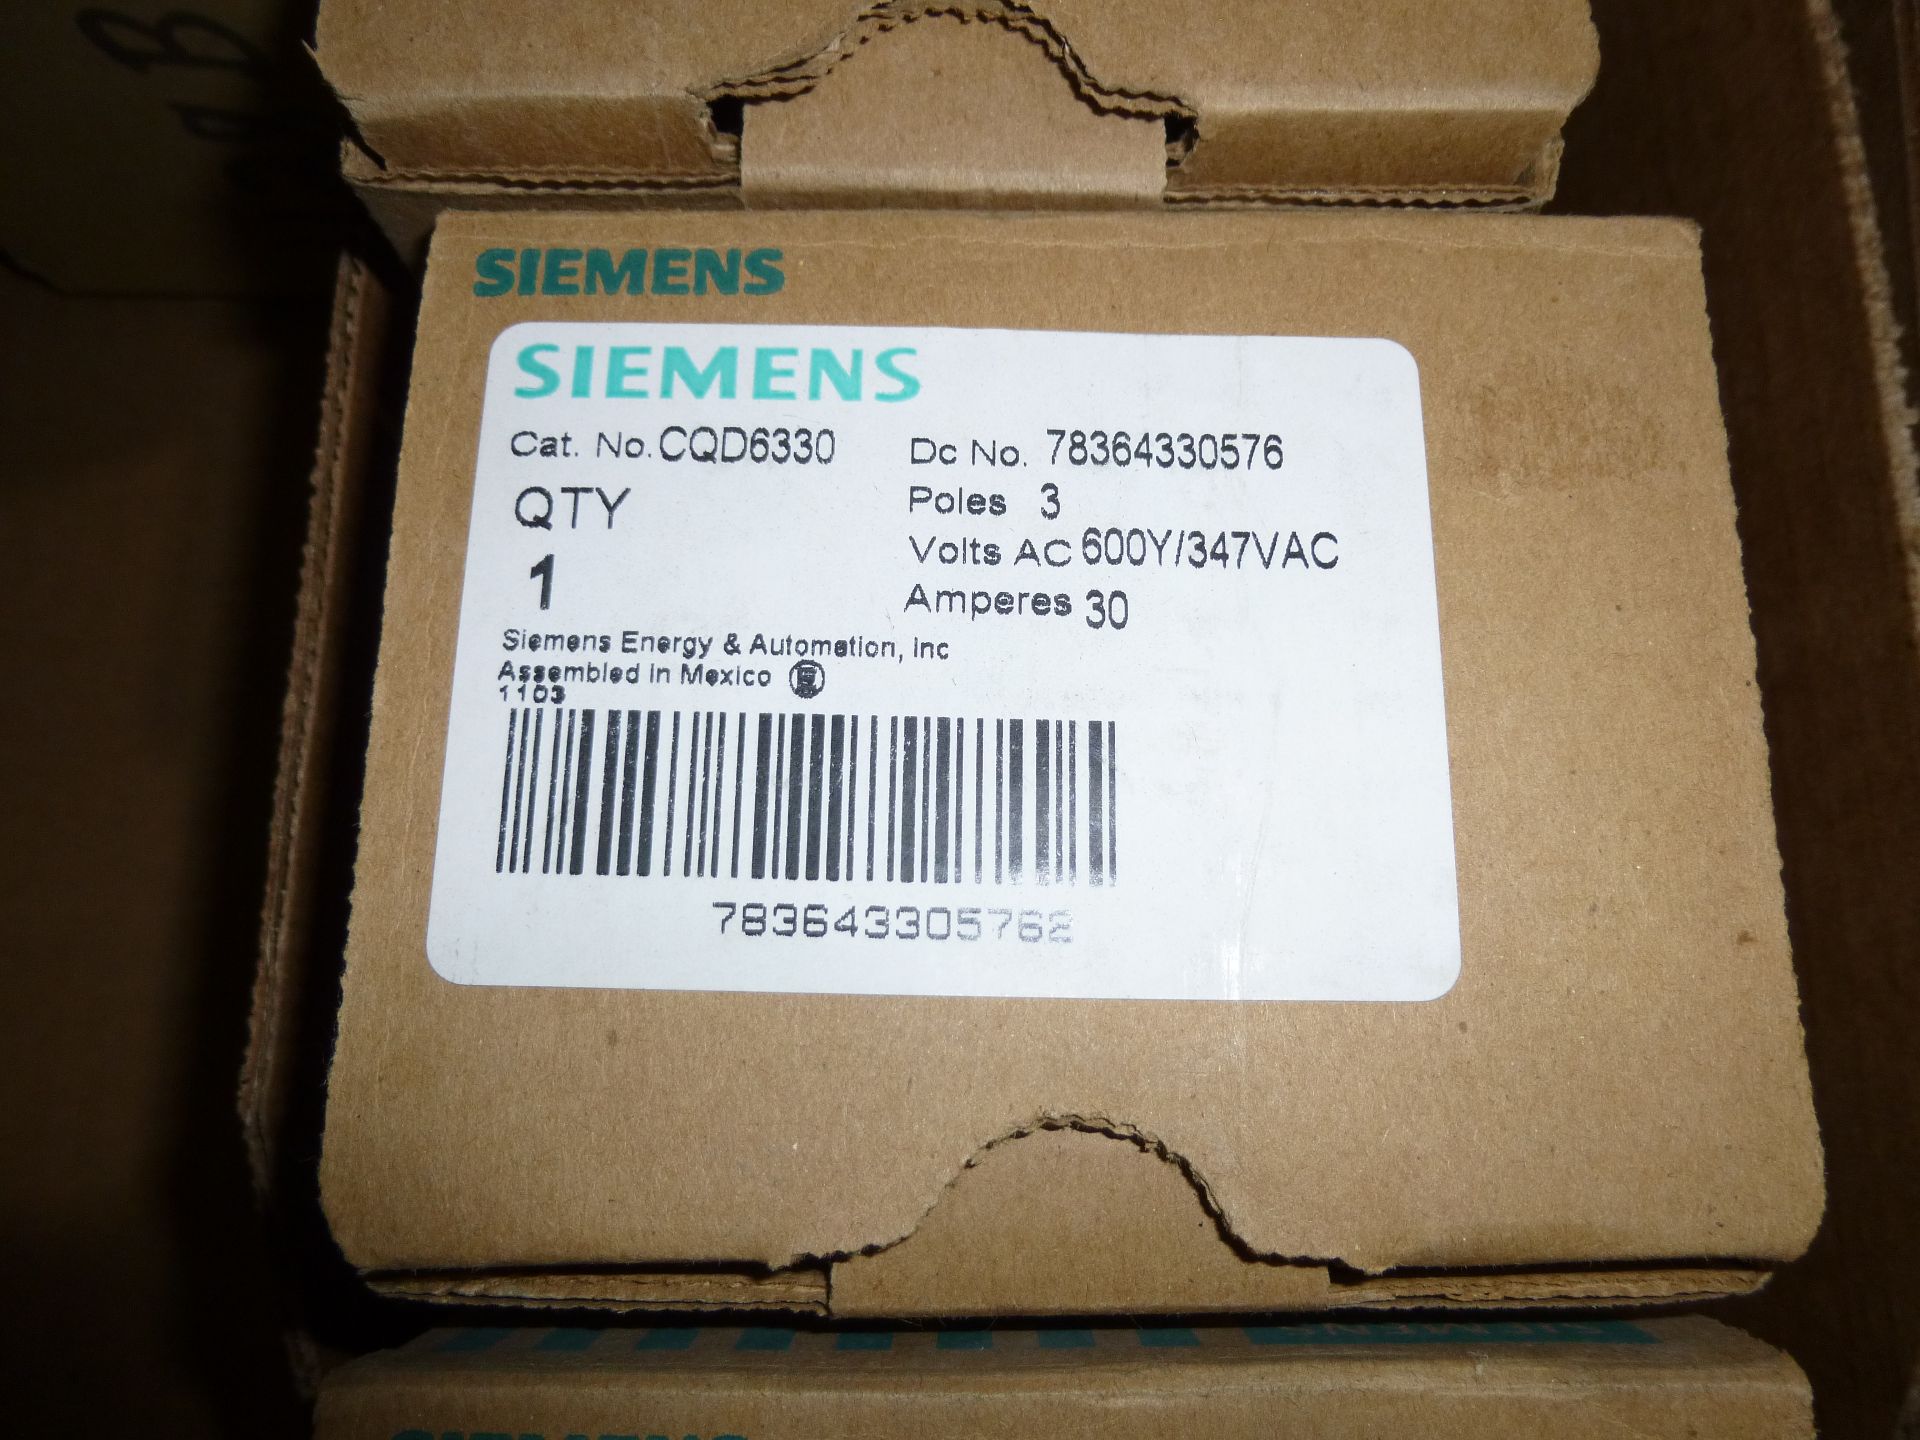 Qty 3 Siemens model CQD6330, new in box, as always with Brolyn LLC auctions, all lots can be - Image 2 of 2